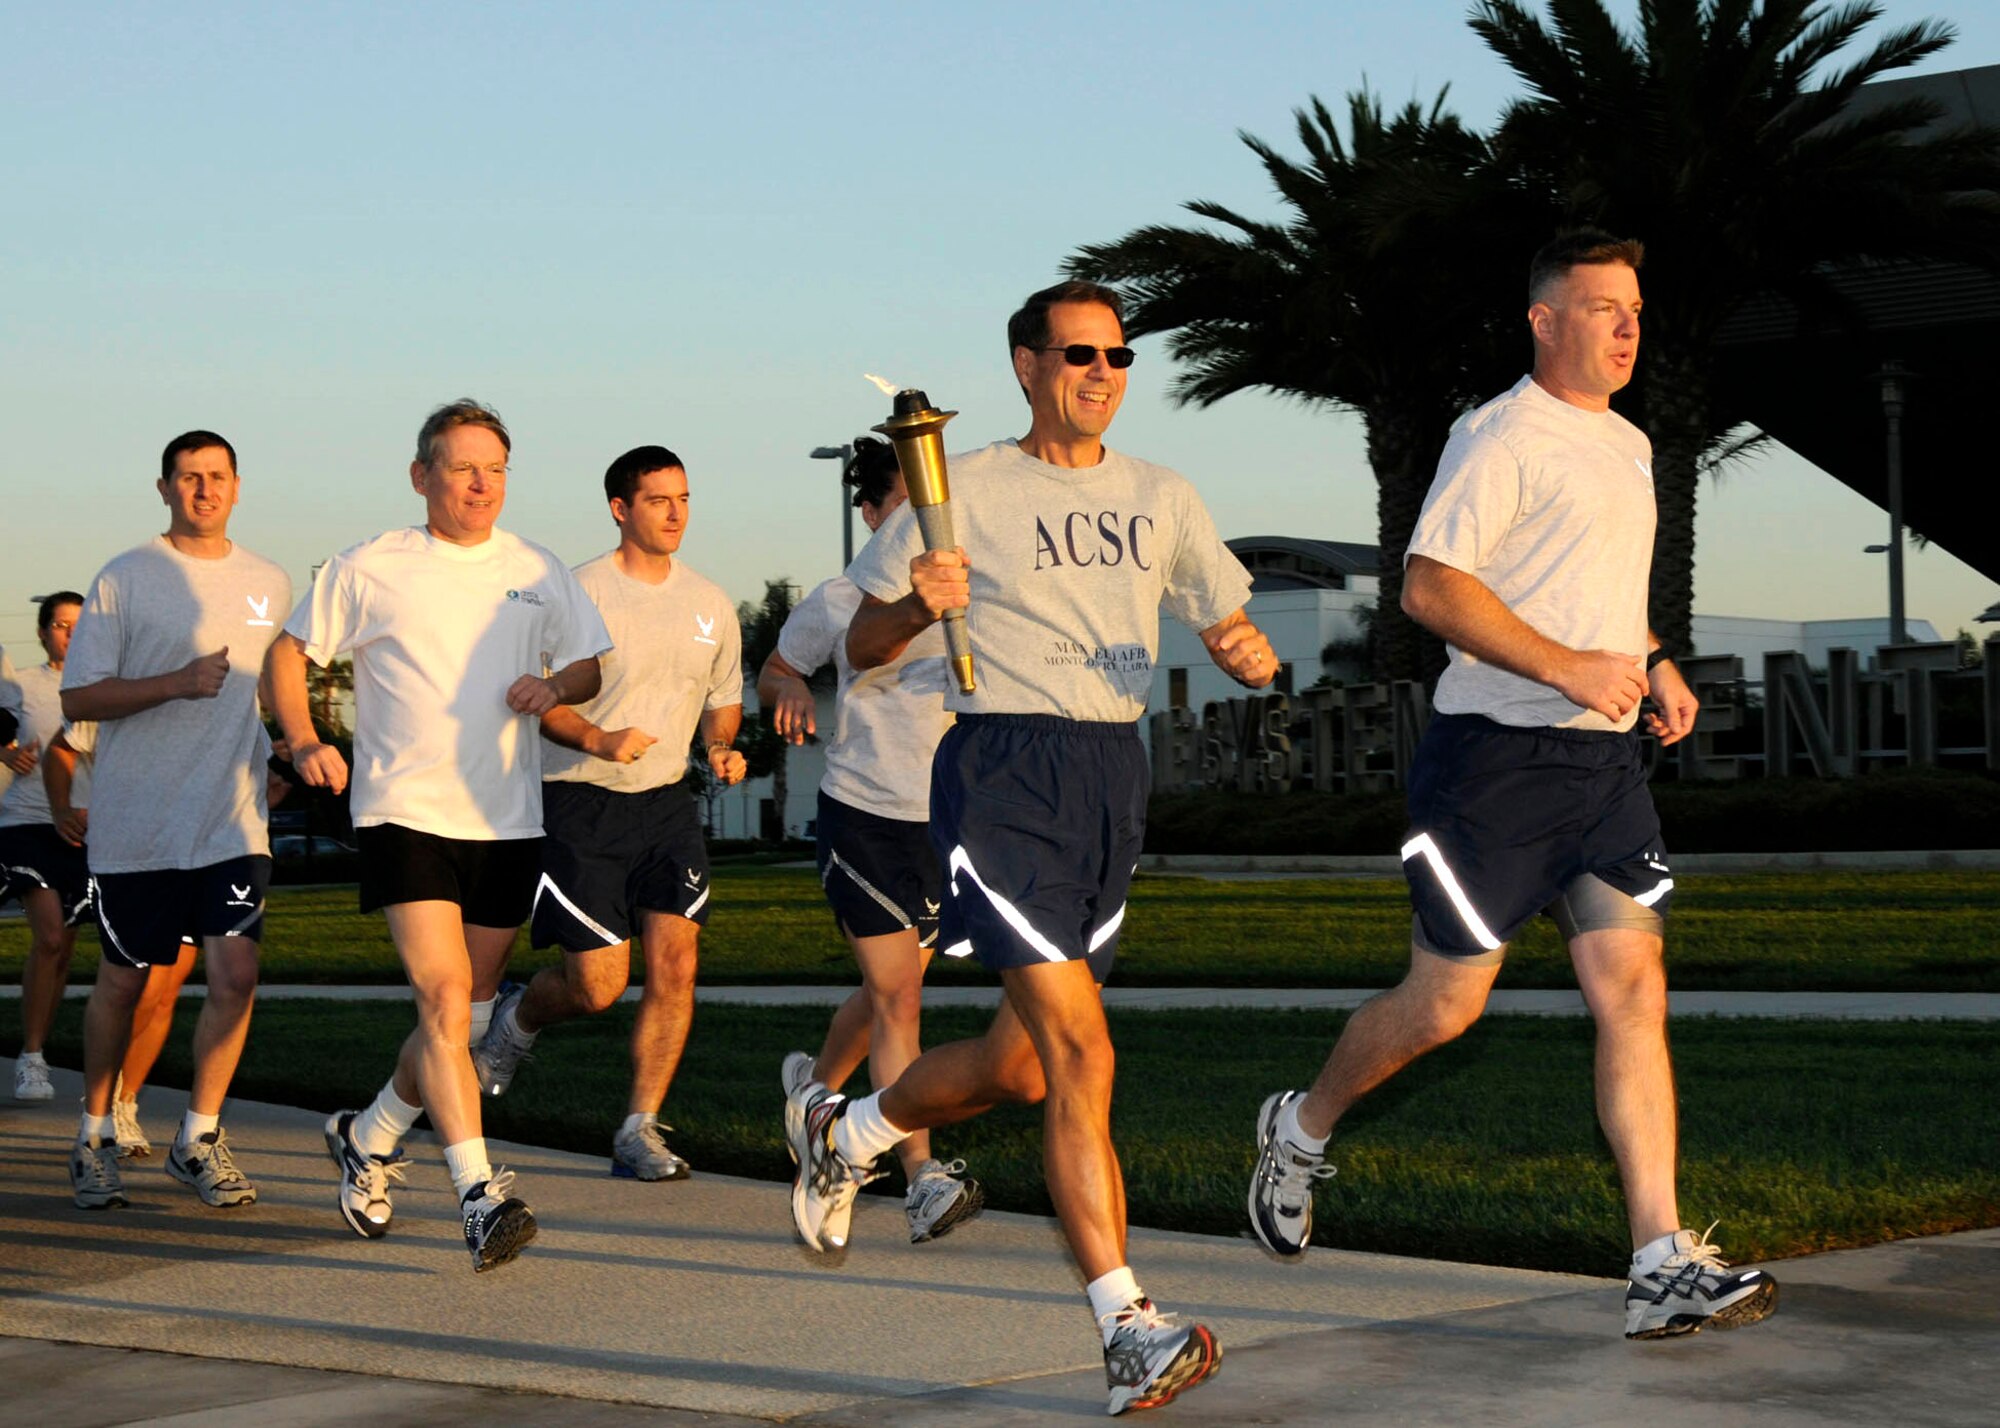 Lt. Gen. Tom Sheridan (second from right), Space and Missile Systems Center commander, runs with the torch with the support of fellow officers during the 24-hour POW/MIA Torch Run held at the Schriever Space Complex track, Sep. 18-19. Los Angeles Air Force Base commemorated the National POW/MIA Recognition Day by holding the 140-mile-long run which more than 180 military, civilian, contractor, and family members participated. The run was concluded with a wreath laying ceremony at the end of the event.  (Photo by Lou Hernandez)